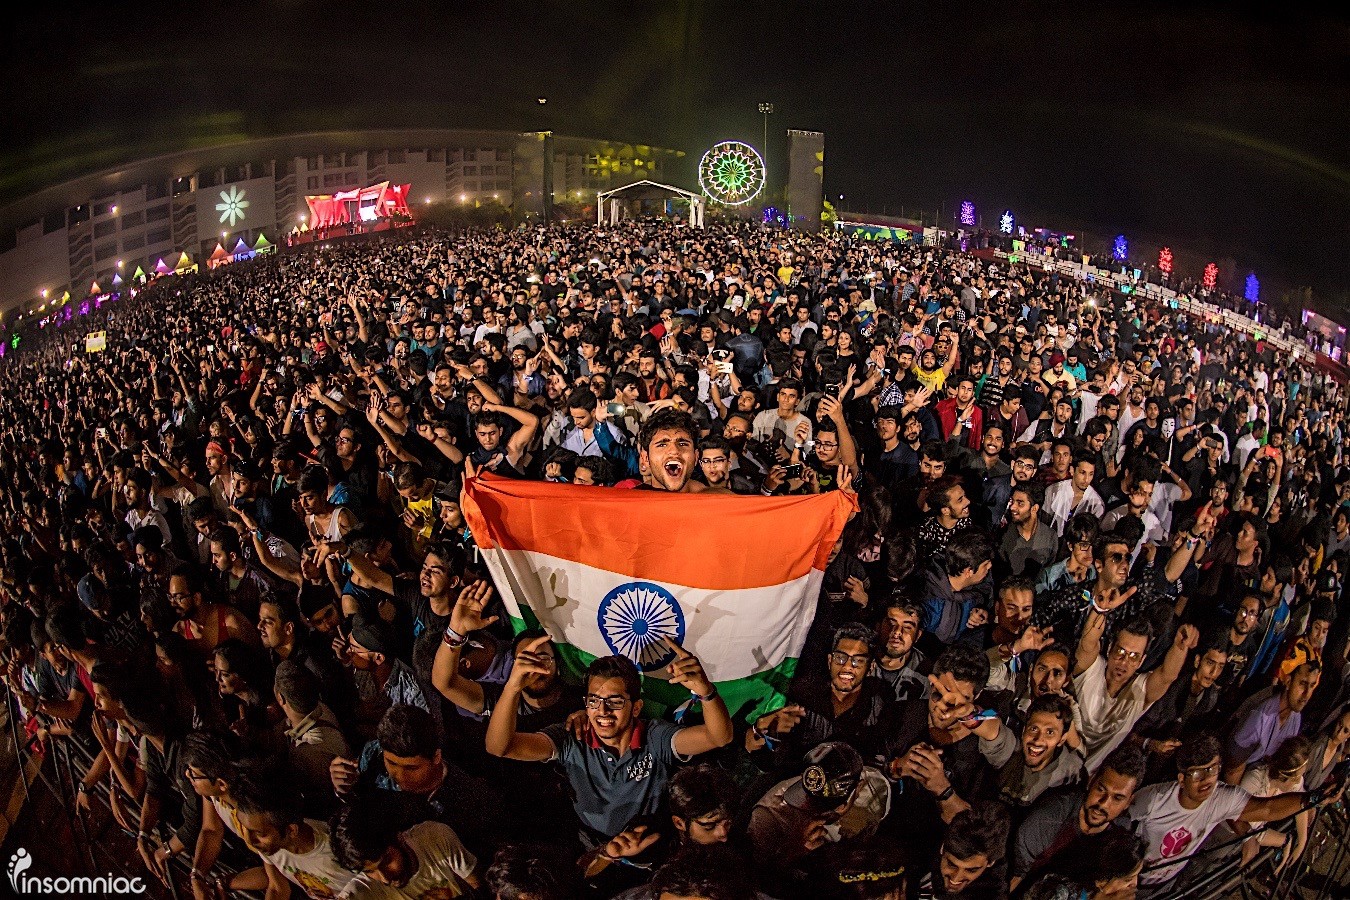 Top 12 Music Festivals in India To Experience Before You Die